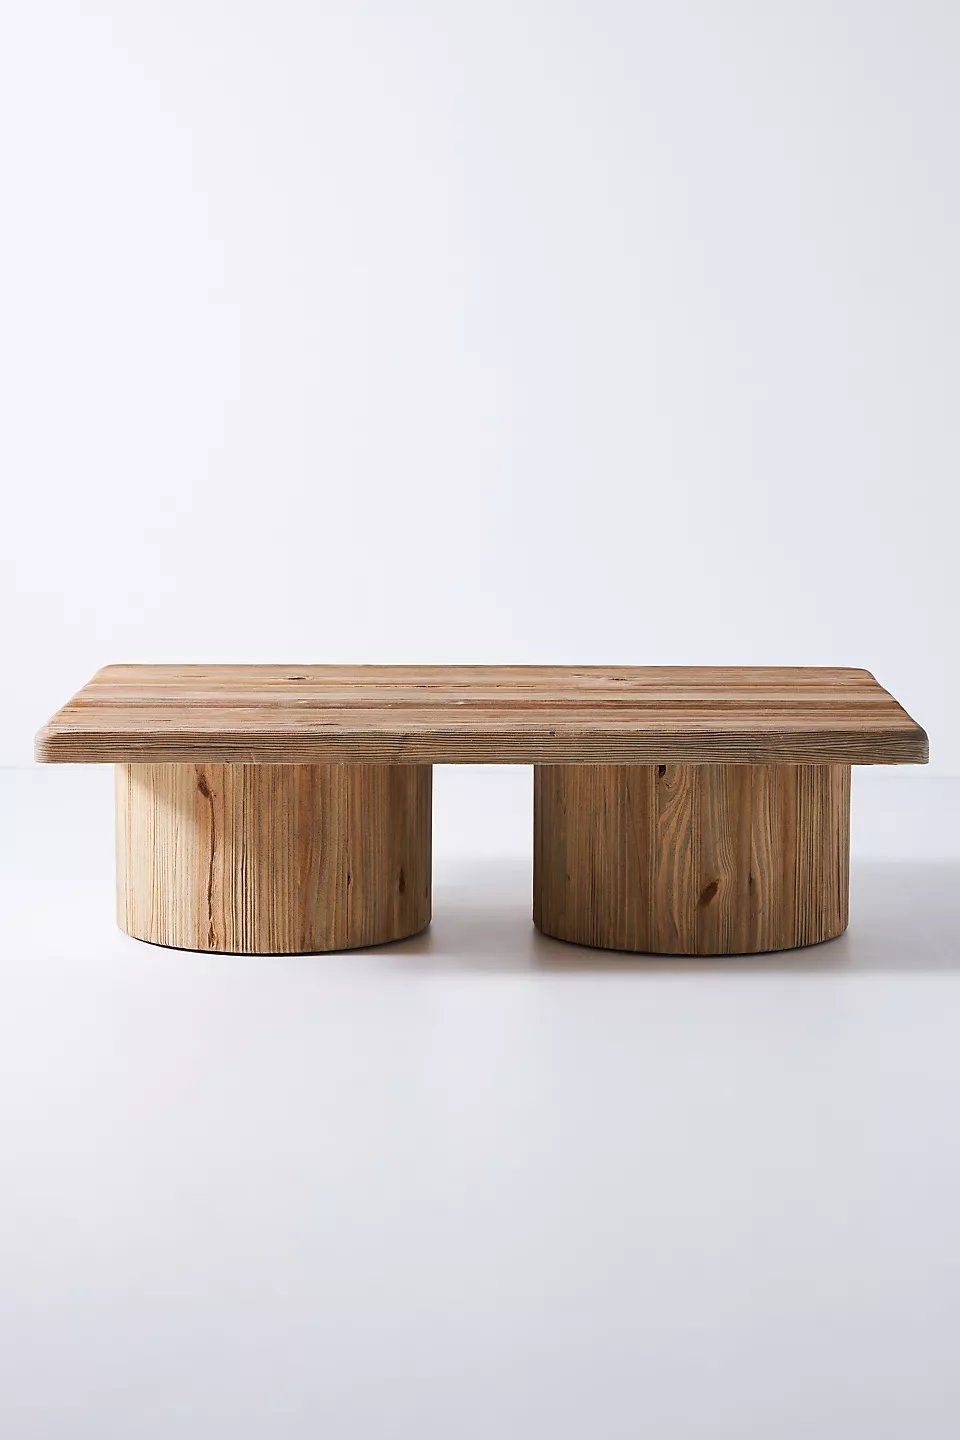 Margate Reclaimed Wood Coffee Table - Image 0